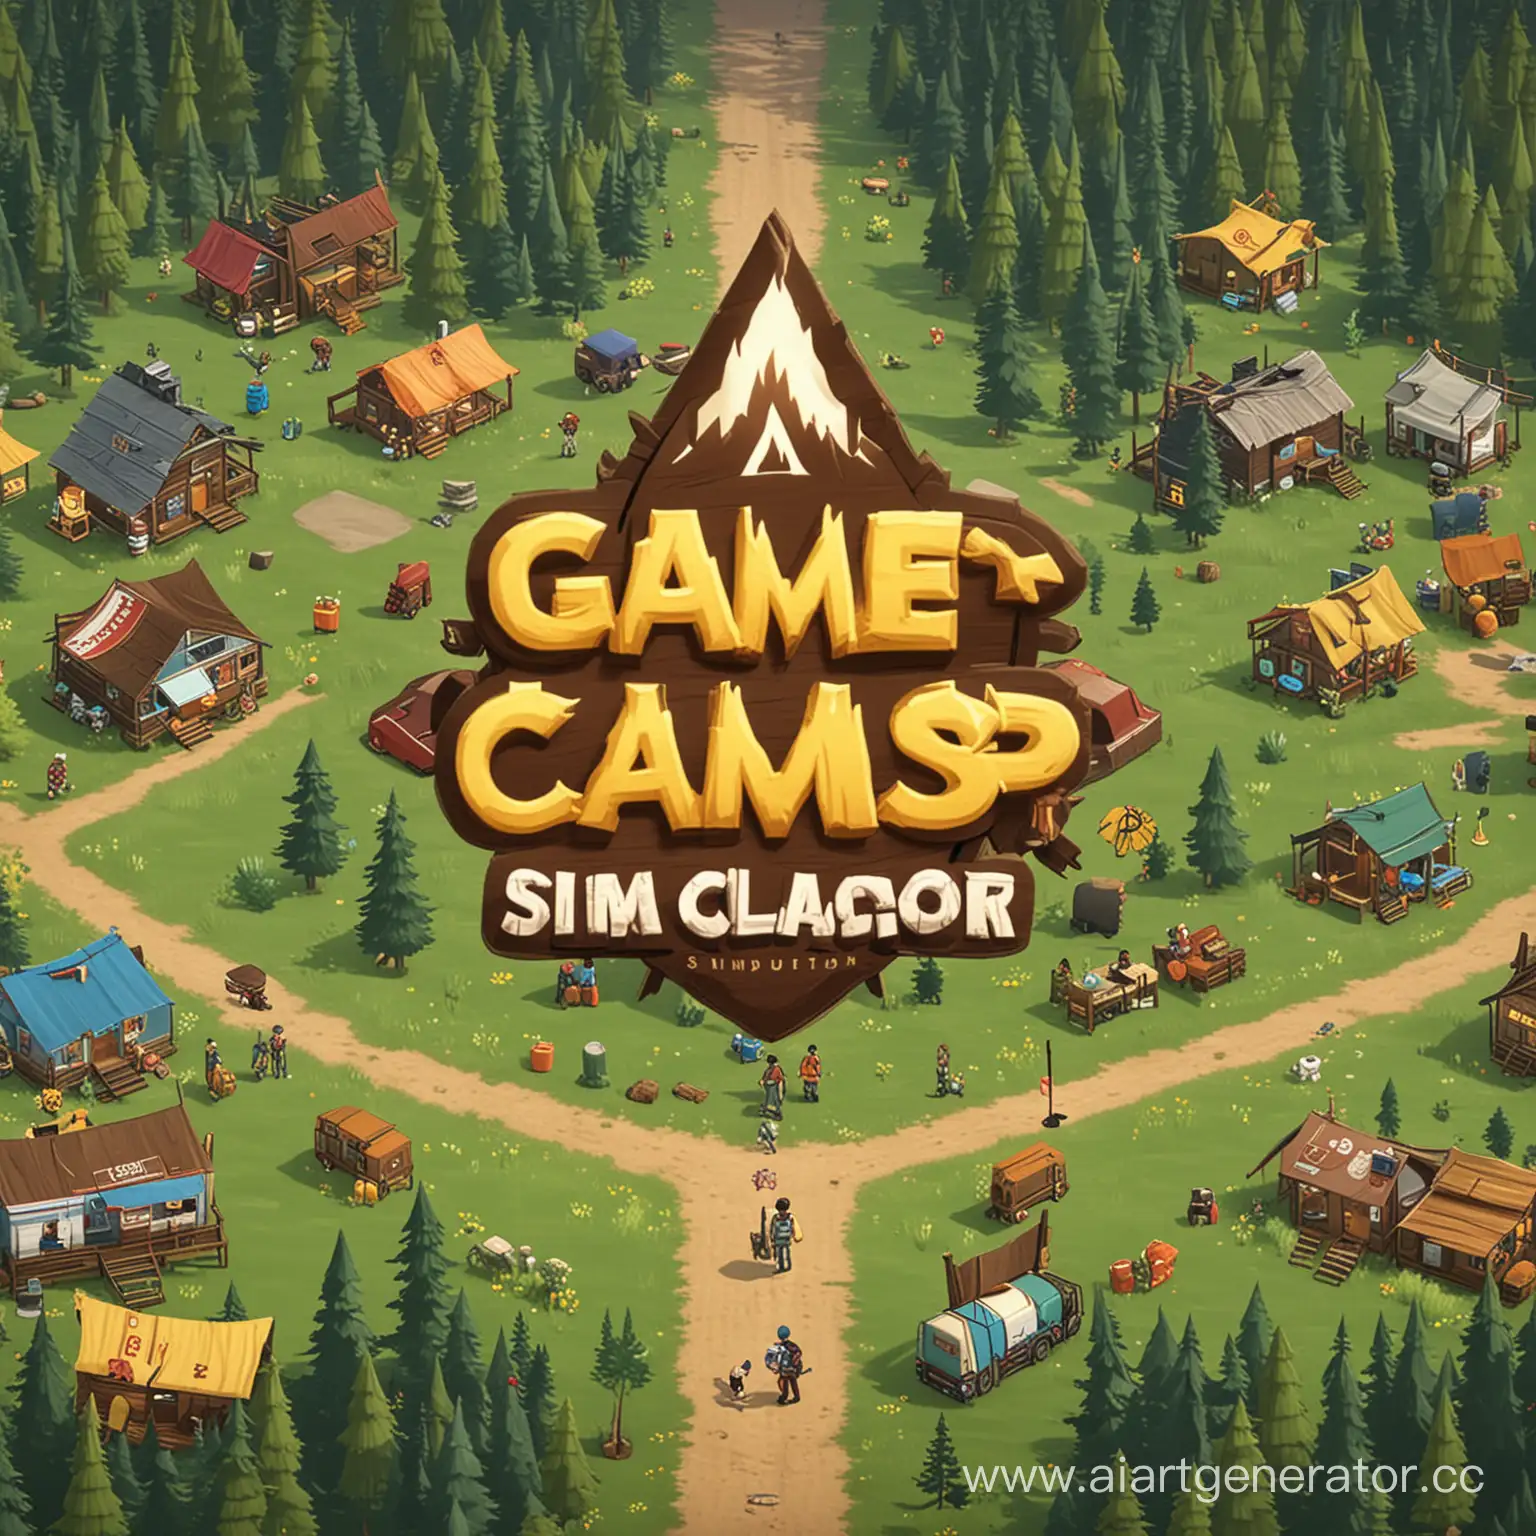 Interactive-Camp-Counselor-Simulator-Engage-in-Fun-and-Educational-Activities-with-Campers